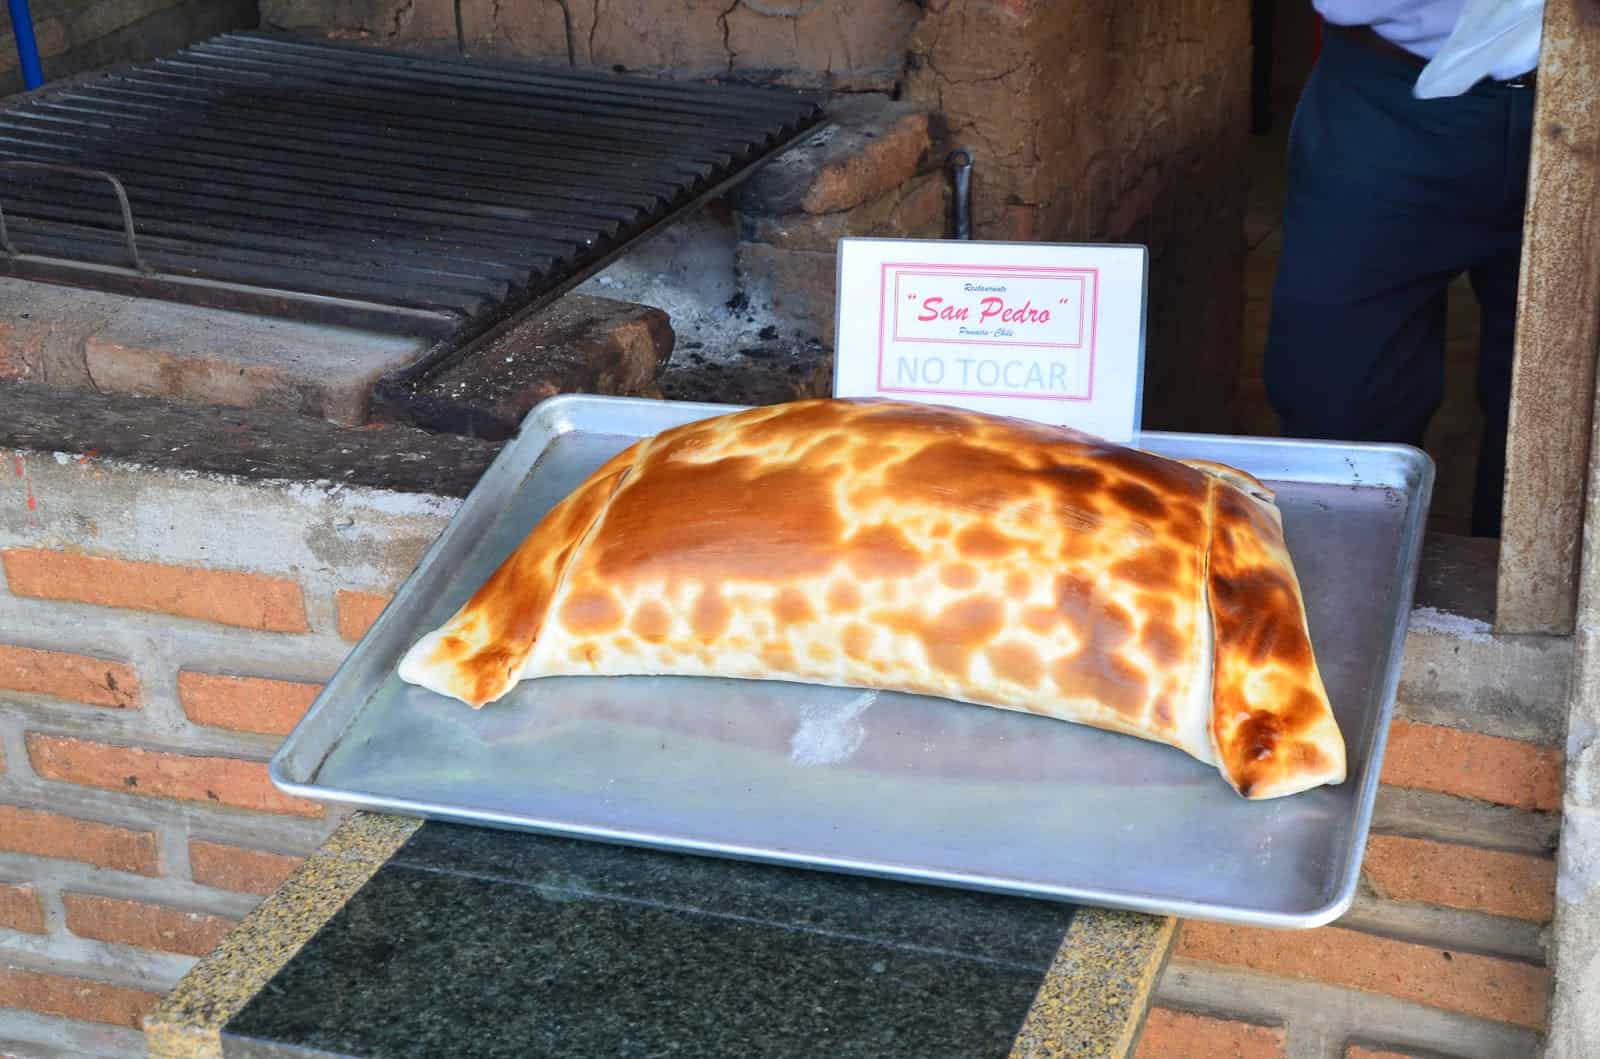 World's largest empanada? in Pomaire, Chile